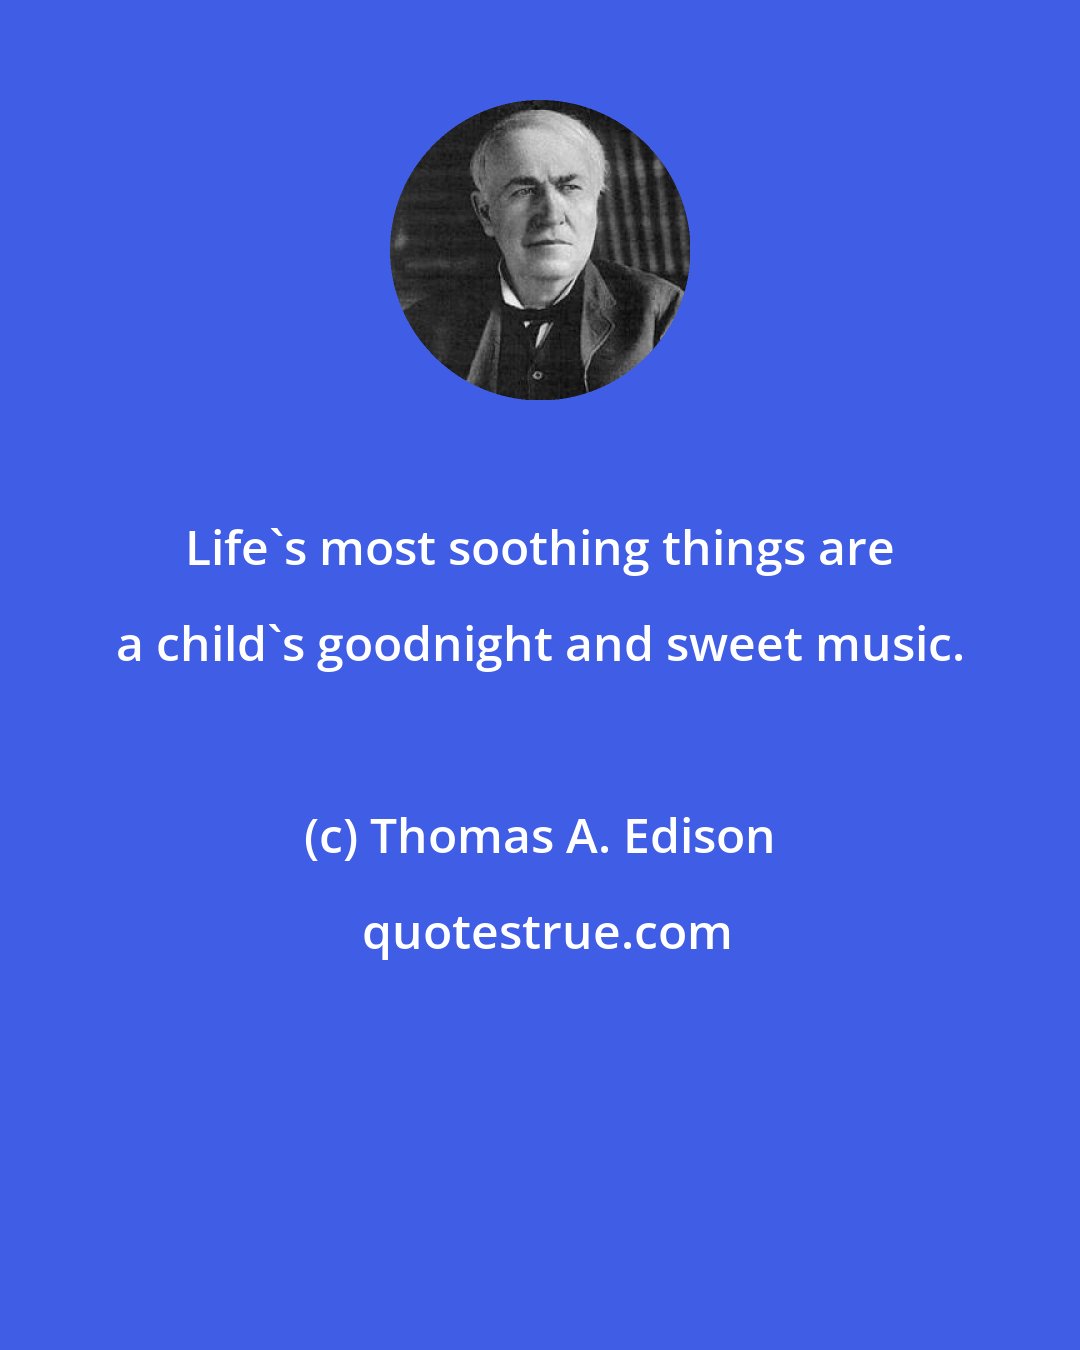 Thomas A. Edison: Life's most soothing things are a child's goodnight and sweet music.